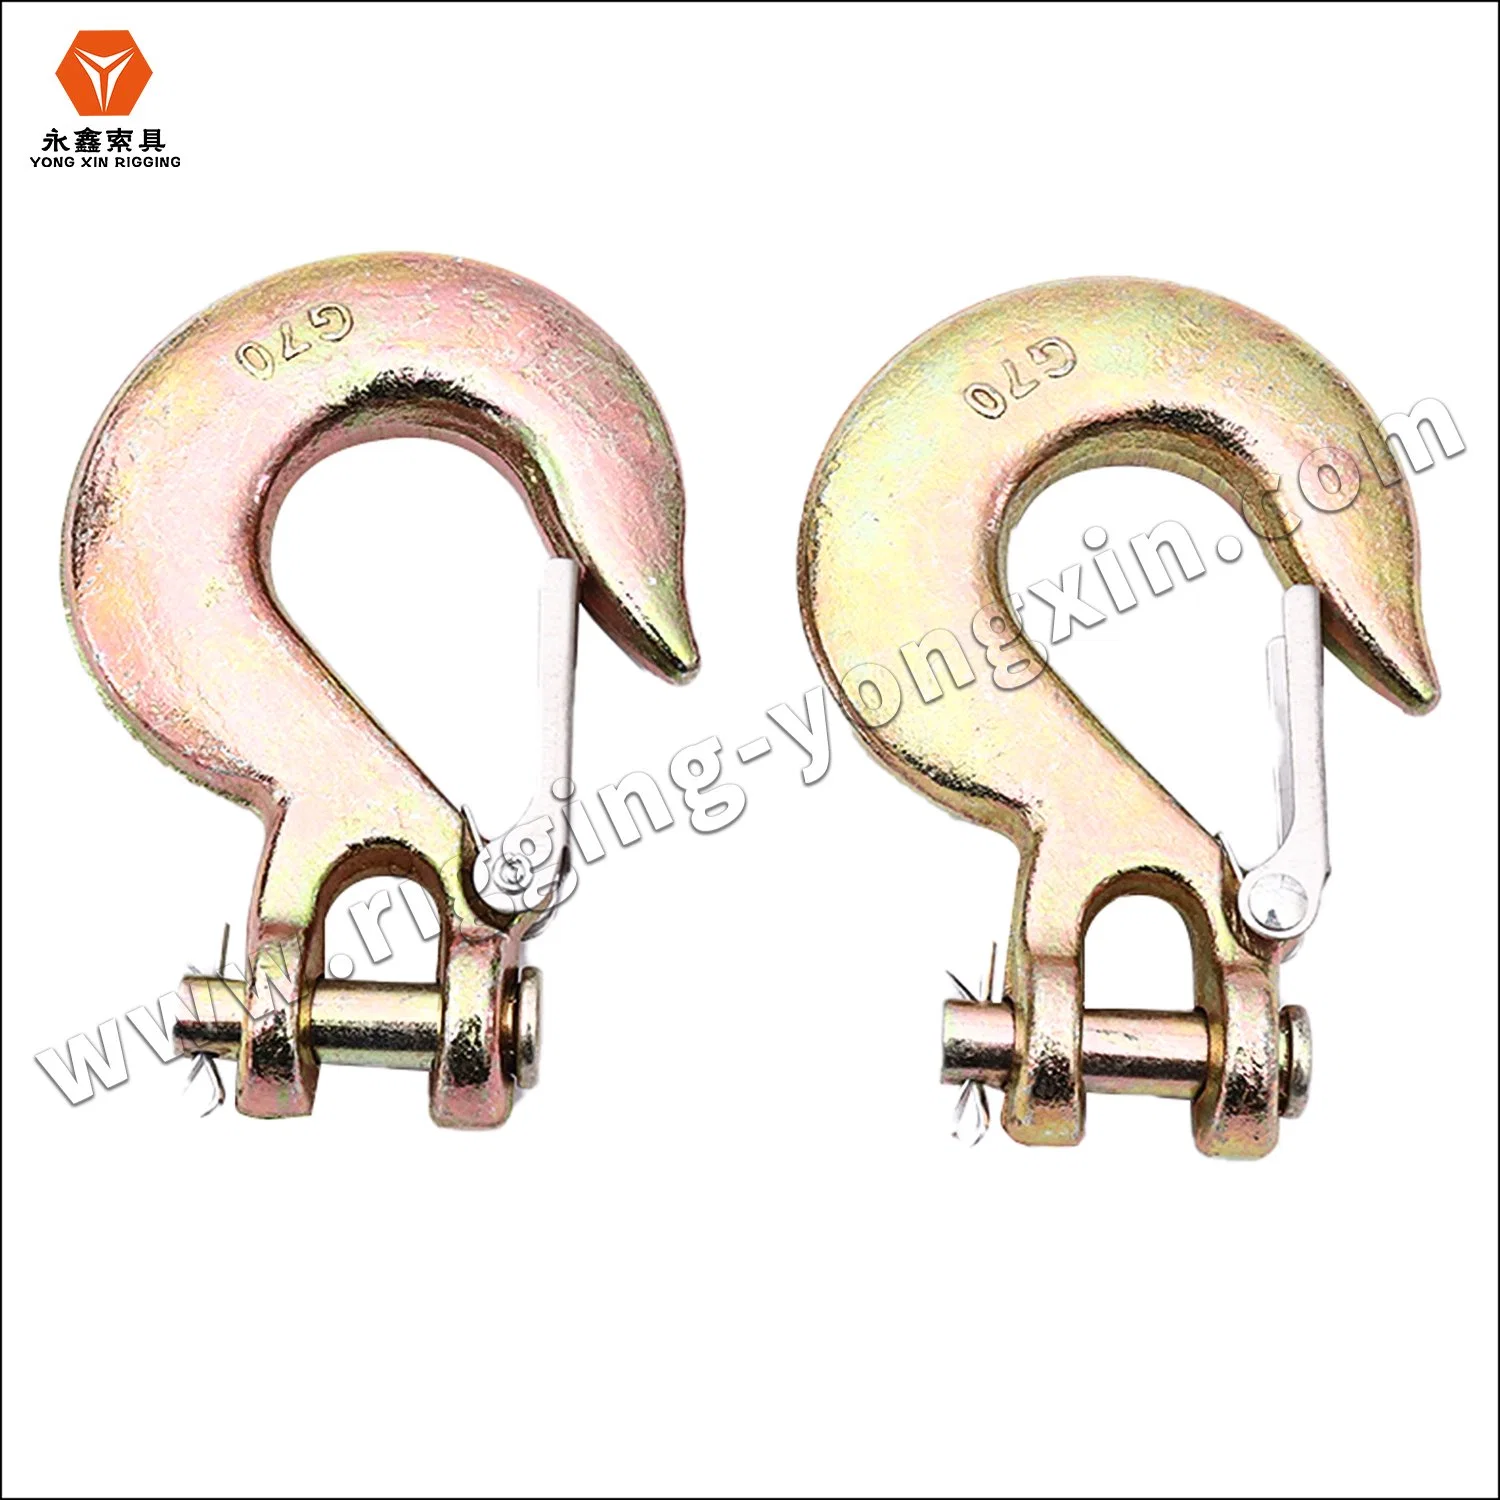 High quality/High cost performance  Rigging of G80 Drop Forged Alloy Steel Self Lock Safety Lifting Clevis Slip Hooks